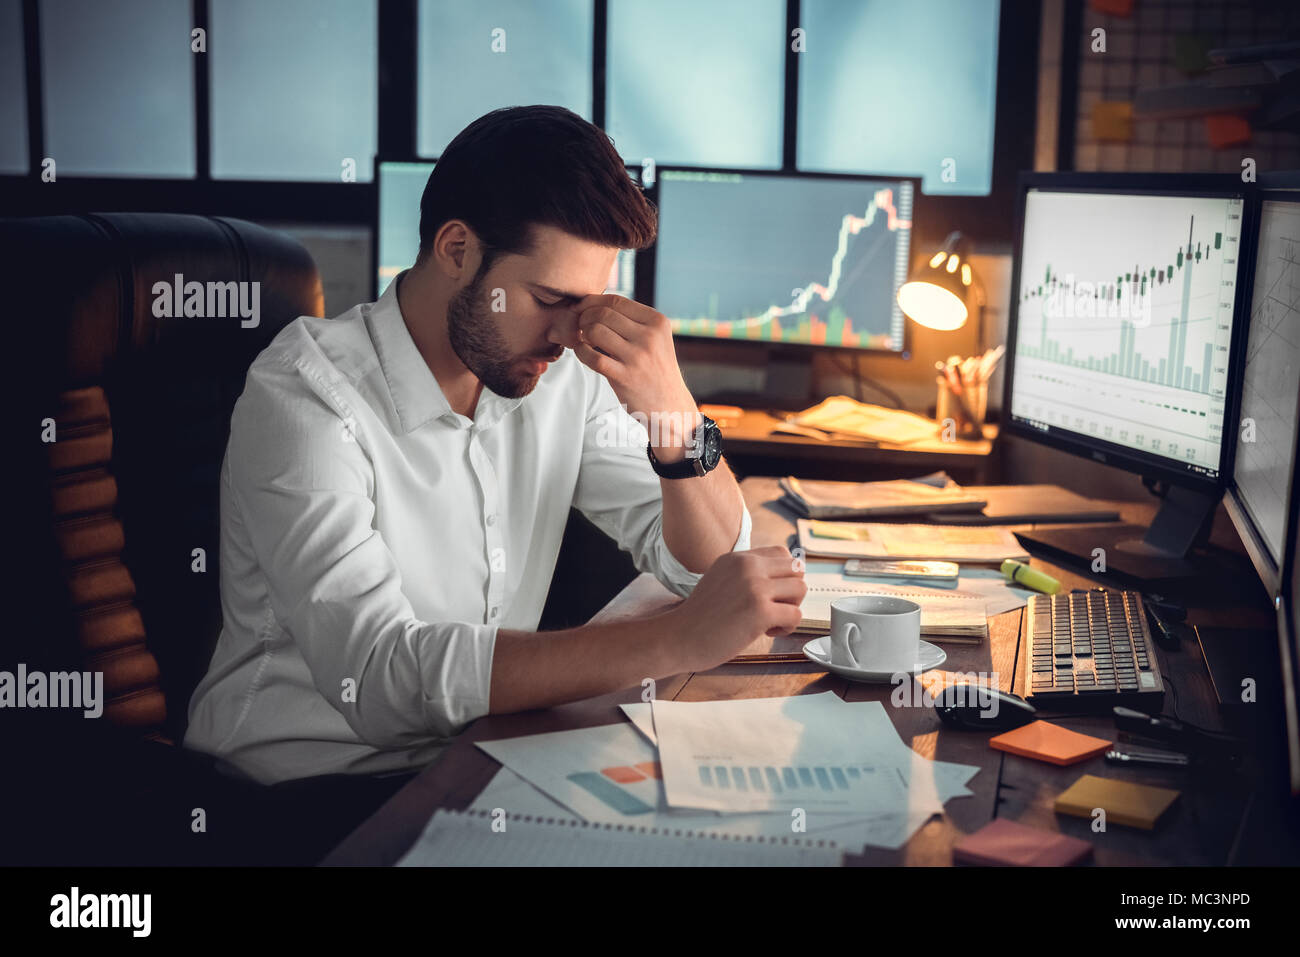 Depressed frustrated trader tired of overwork or stressed by bankruptcy, sad shocked investor desperate about financial crisis or money loss, upset bu Stock Photo